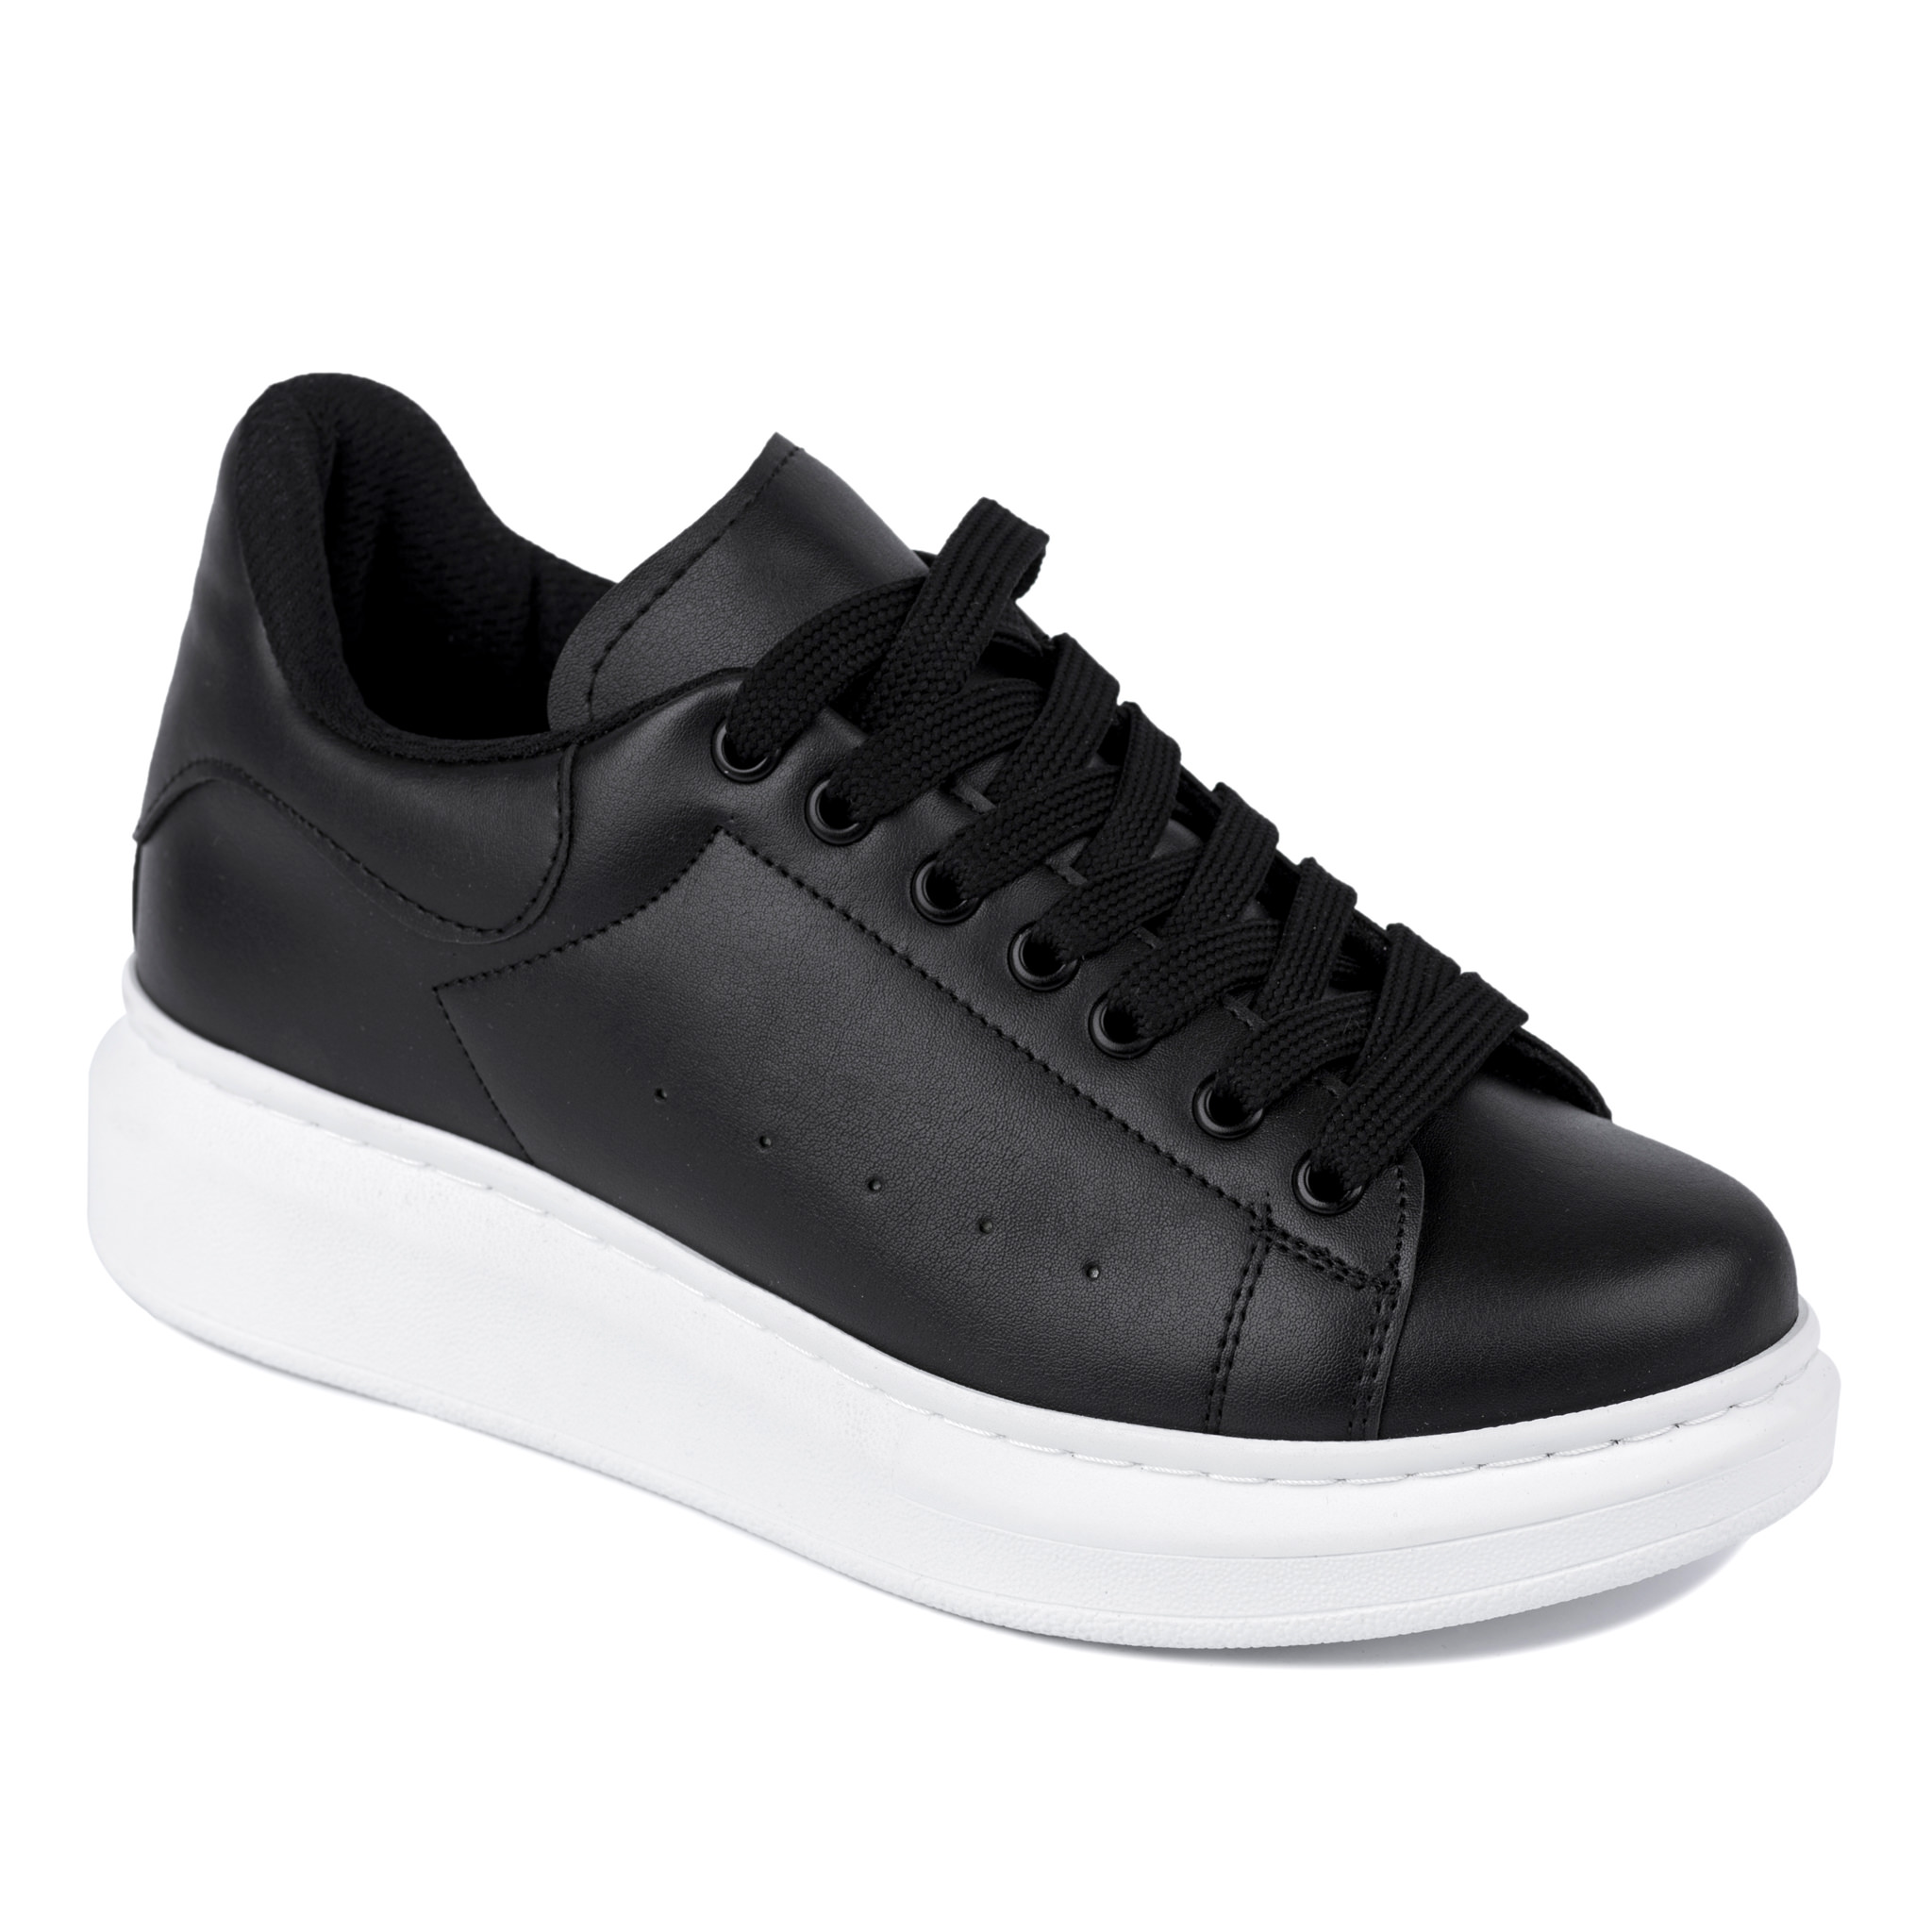 HIGH SOLE SNEAKERS - BLACK